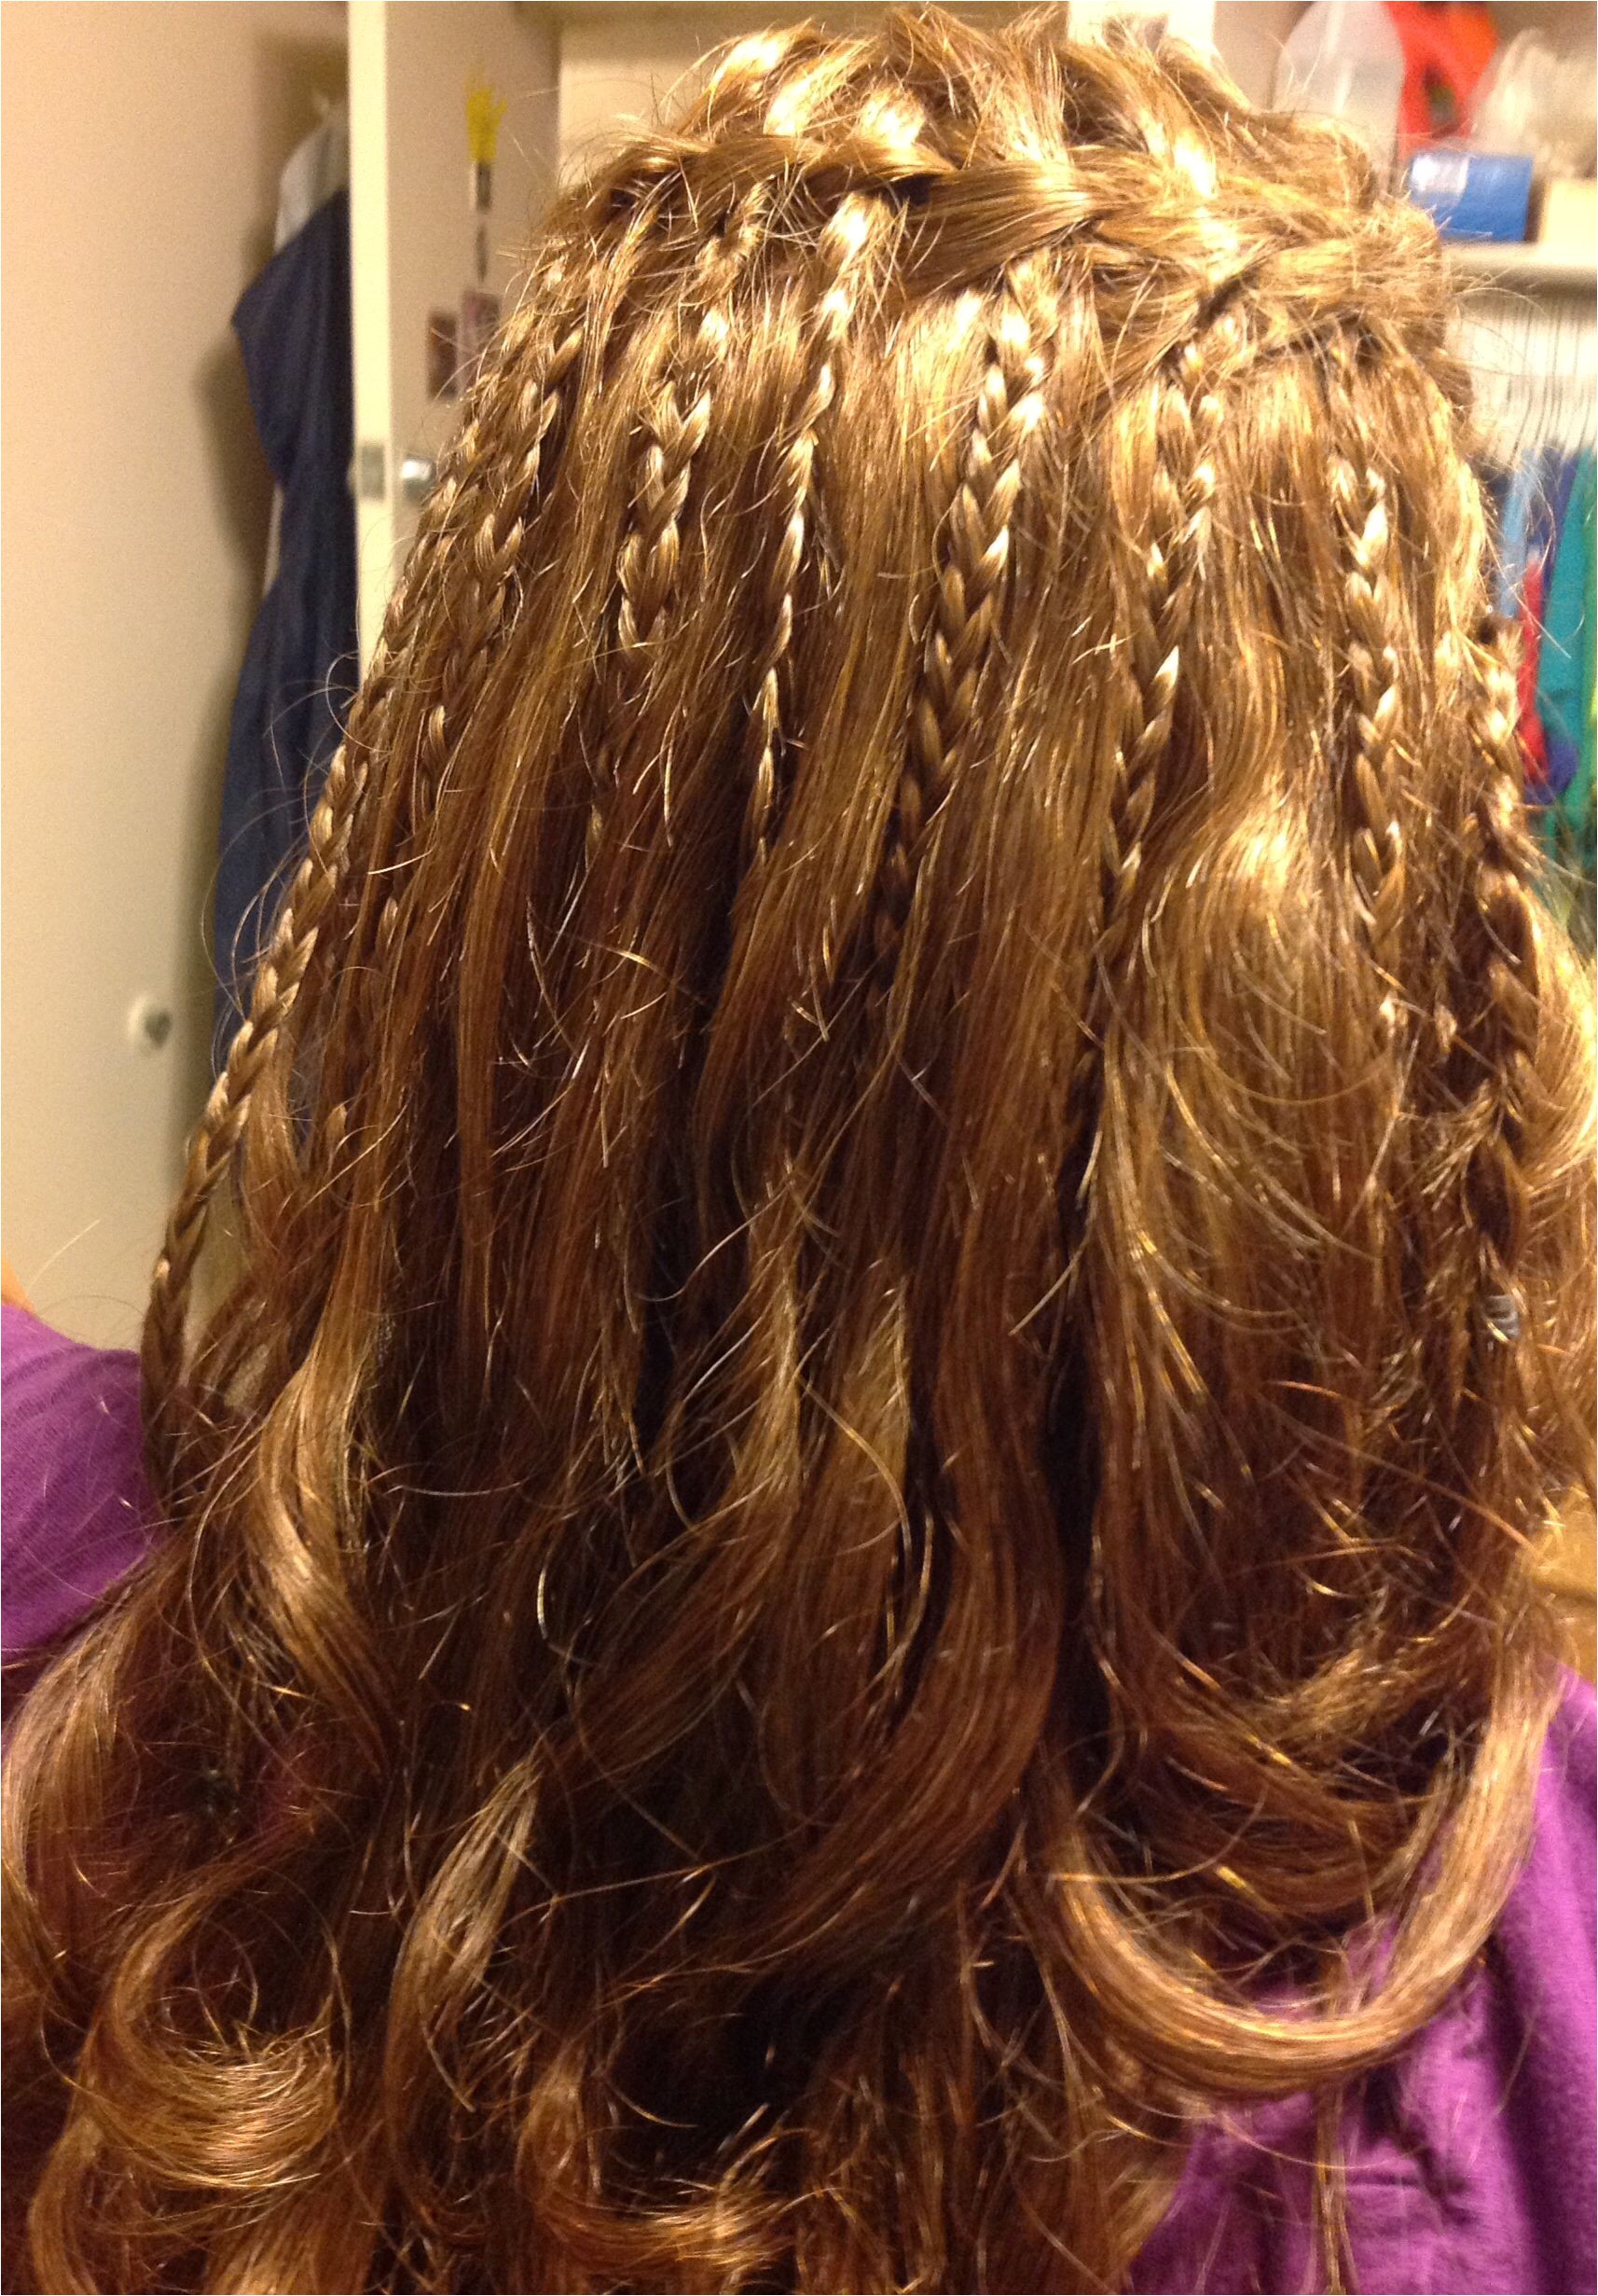 Waterfall braid then braid the strands that "waterfall" then curl the ends